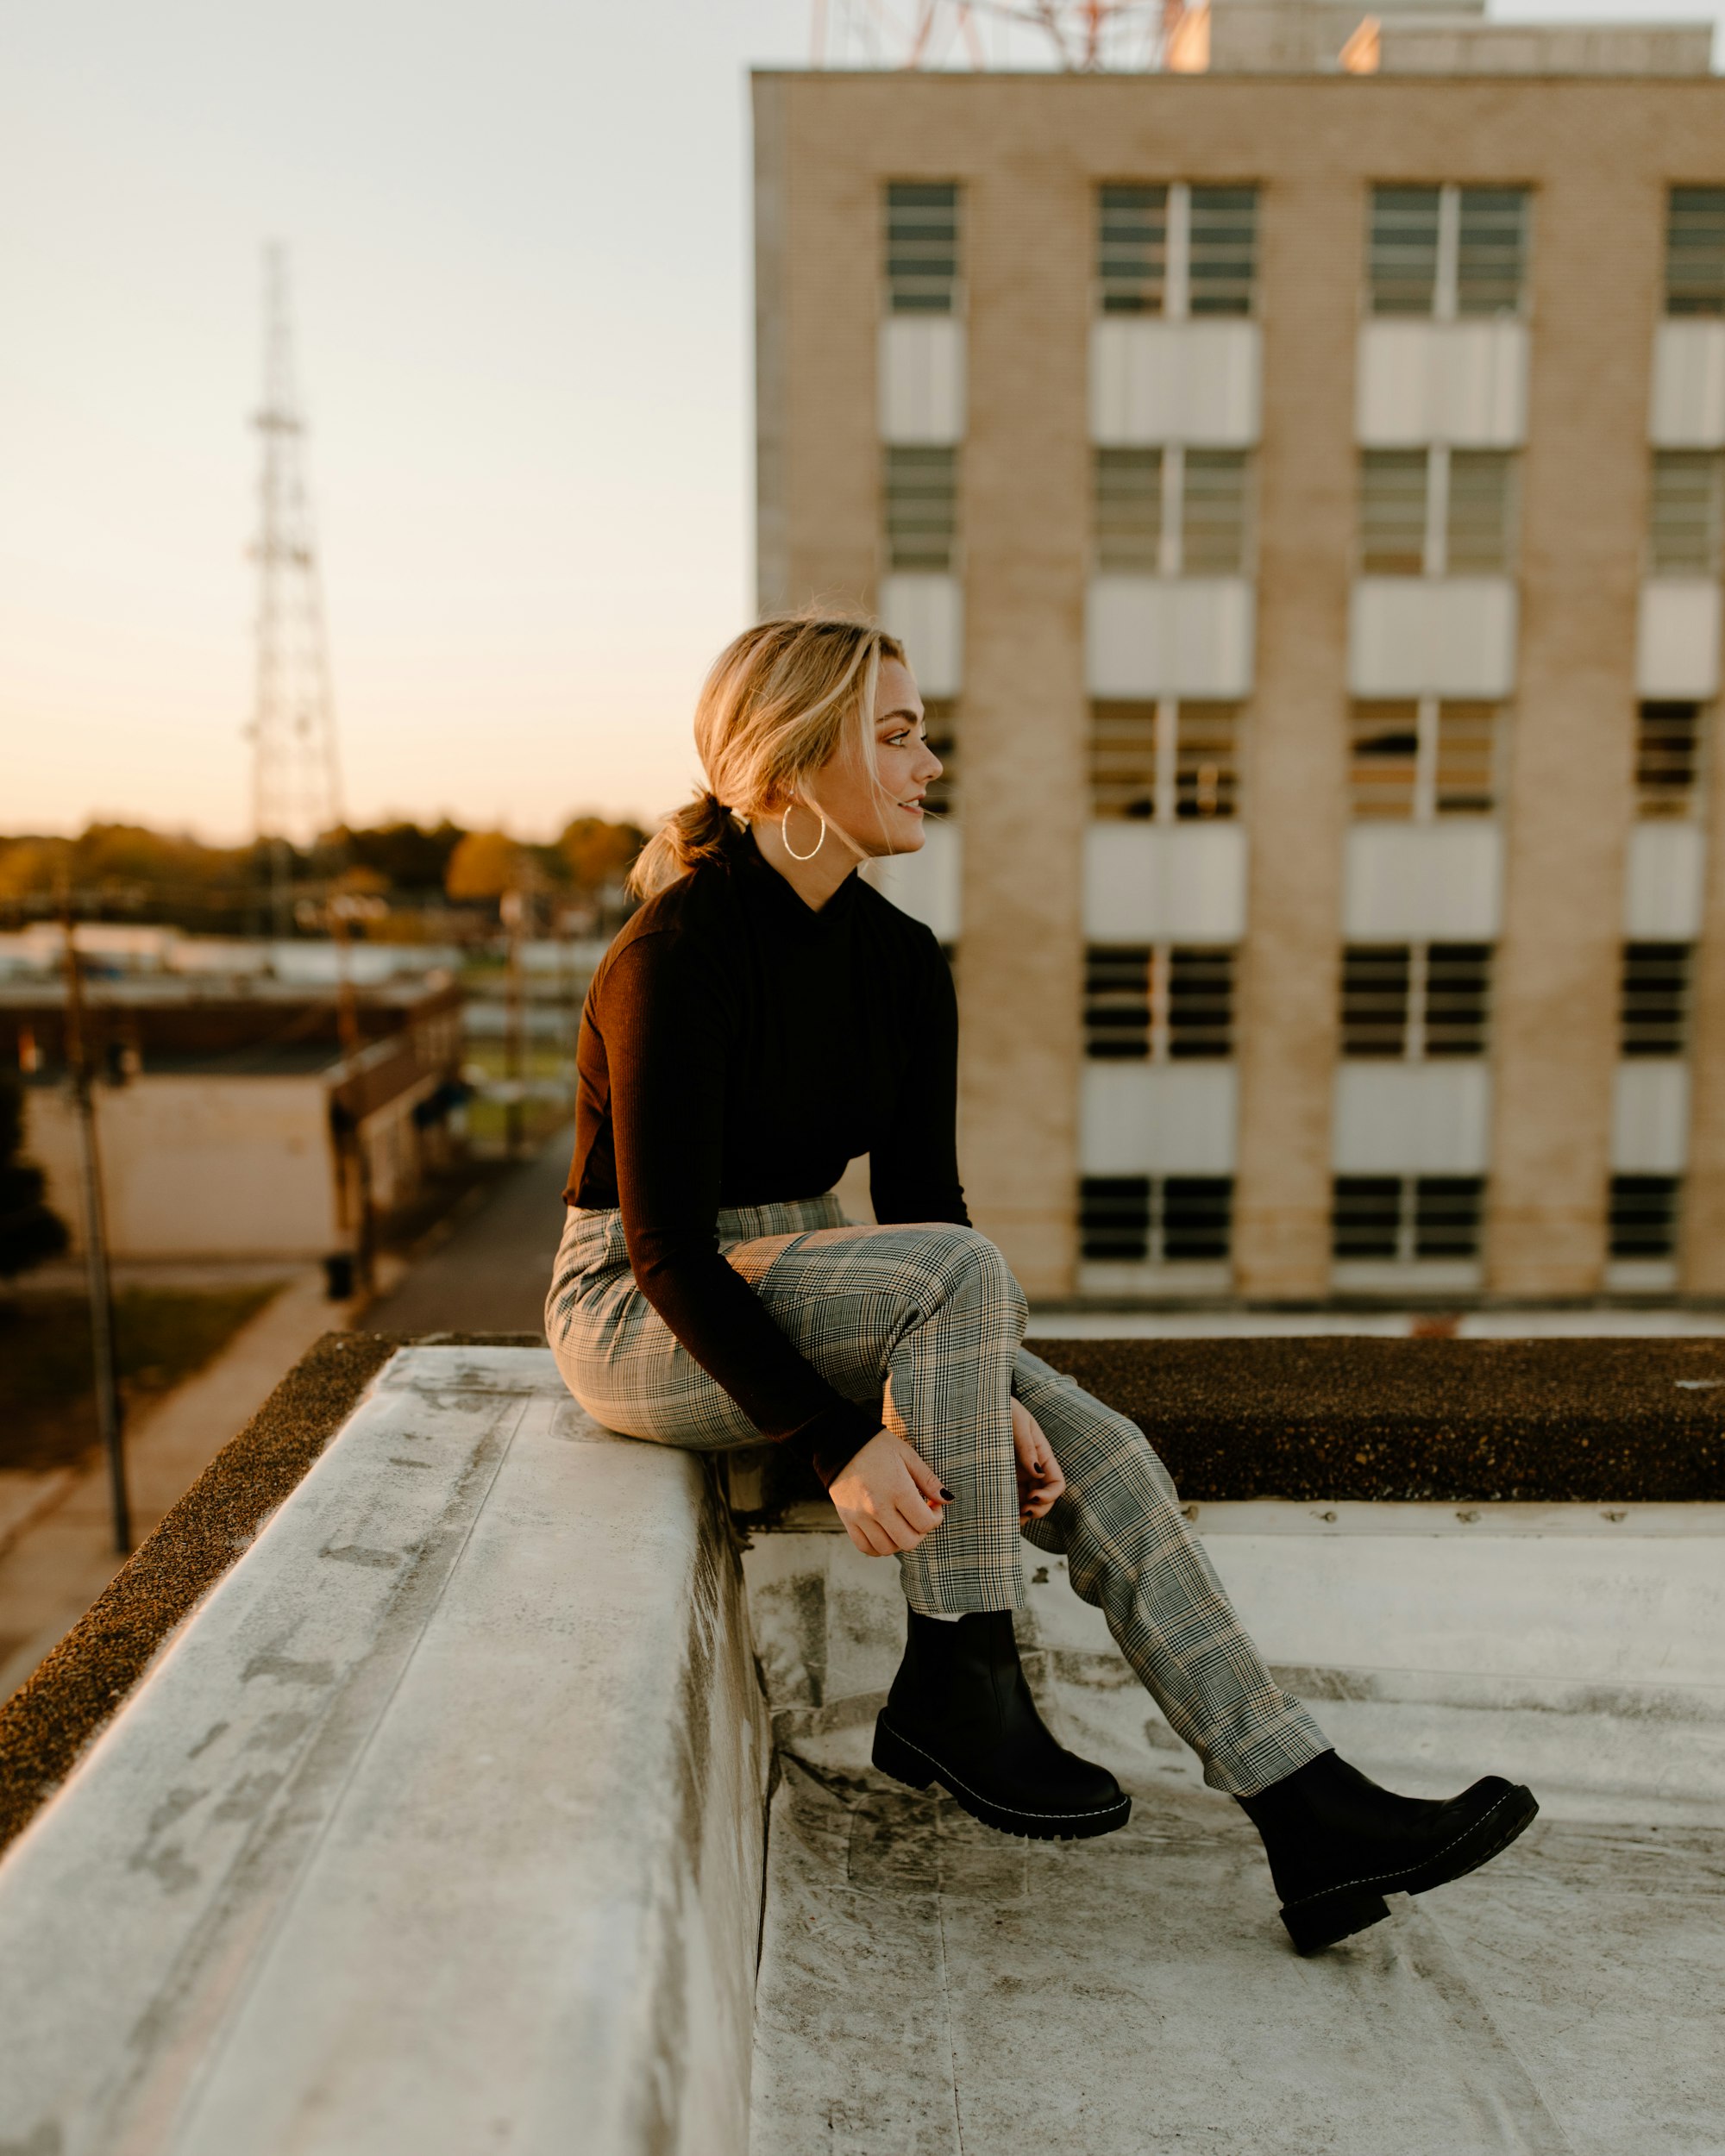 hip young woman in a burgundy turtleneck sweater sitting on corner rooftop building looking out at sunset